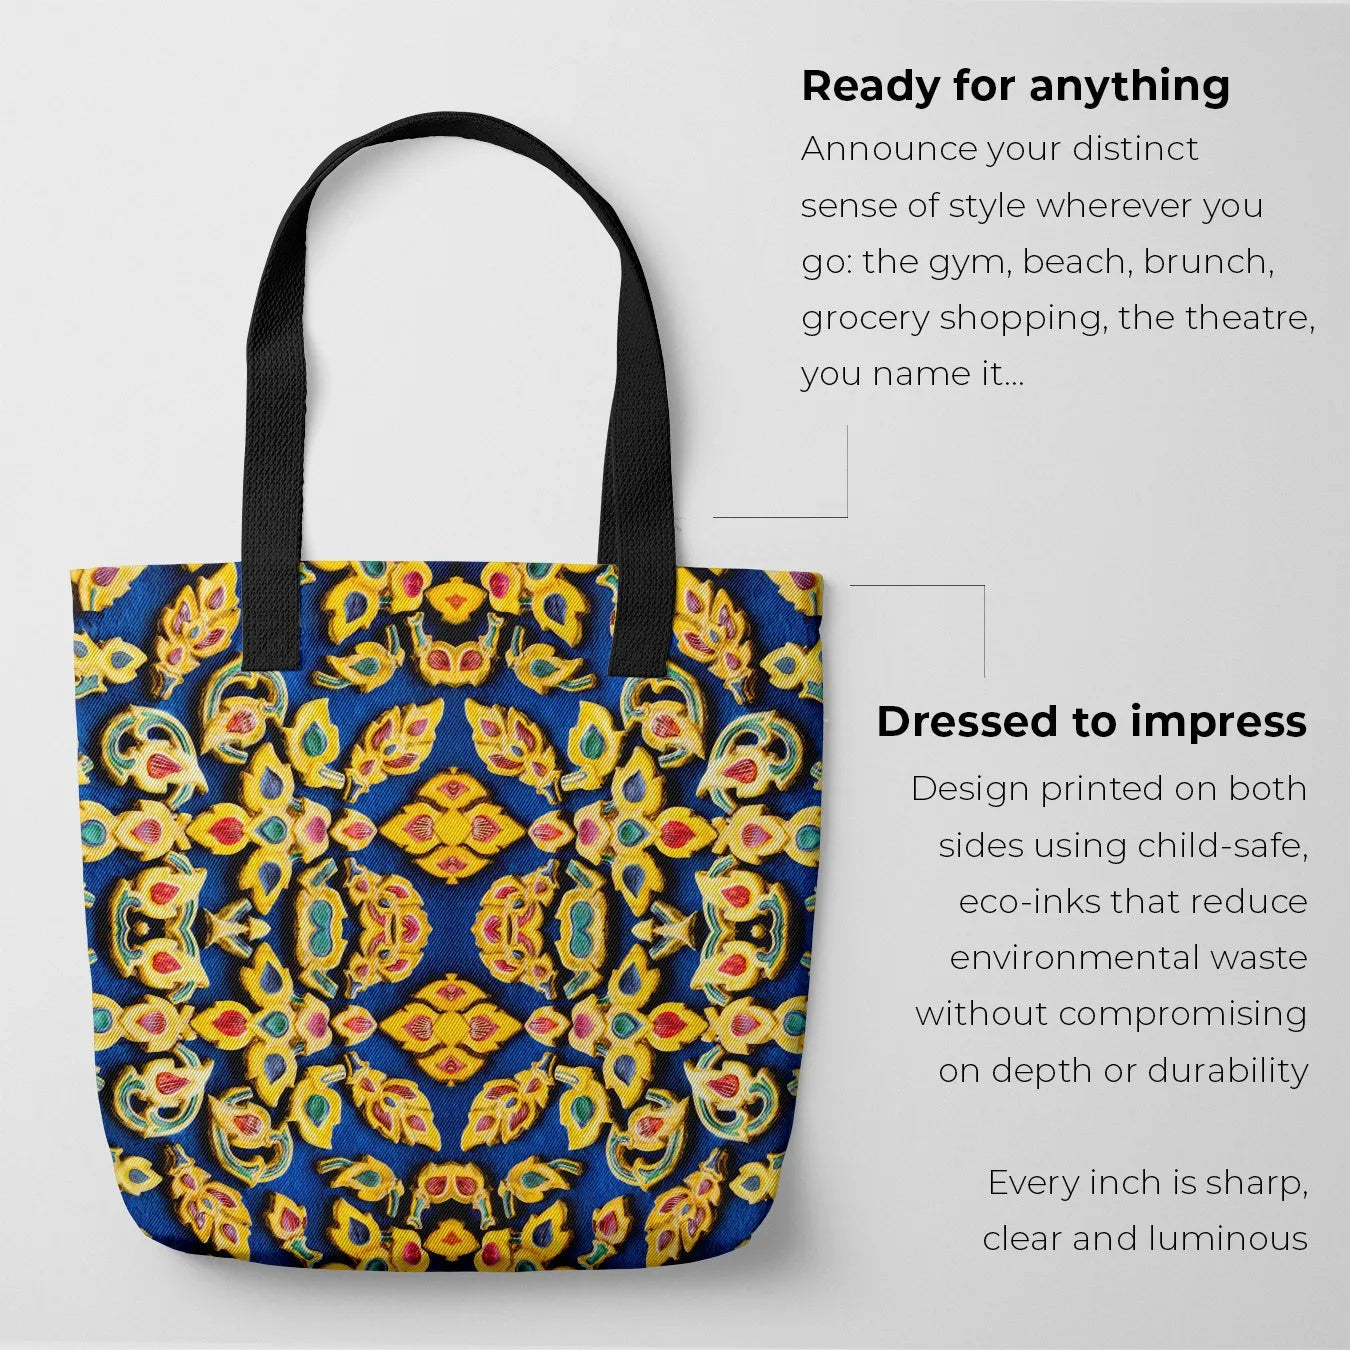 Ayodhya Tote - Heavy Duty Reusable Grocery Bag - Shopping Totes - Aesthetic Art